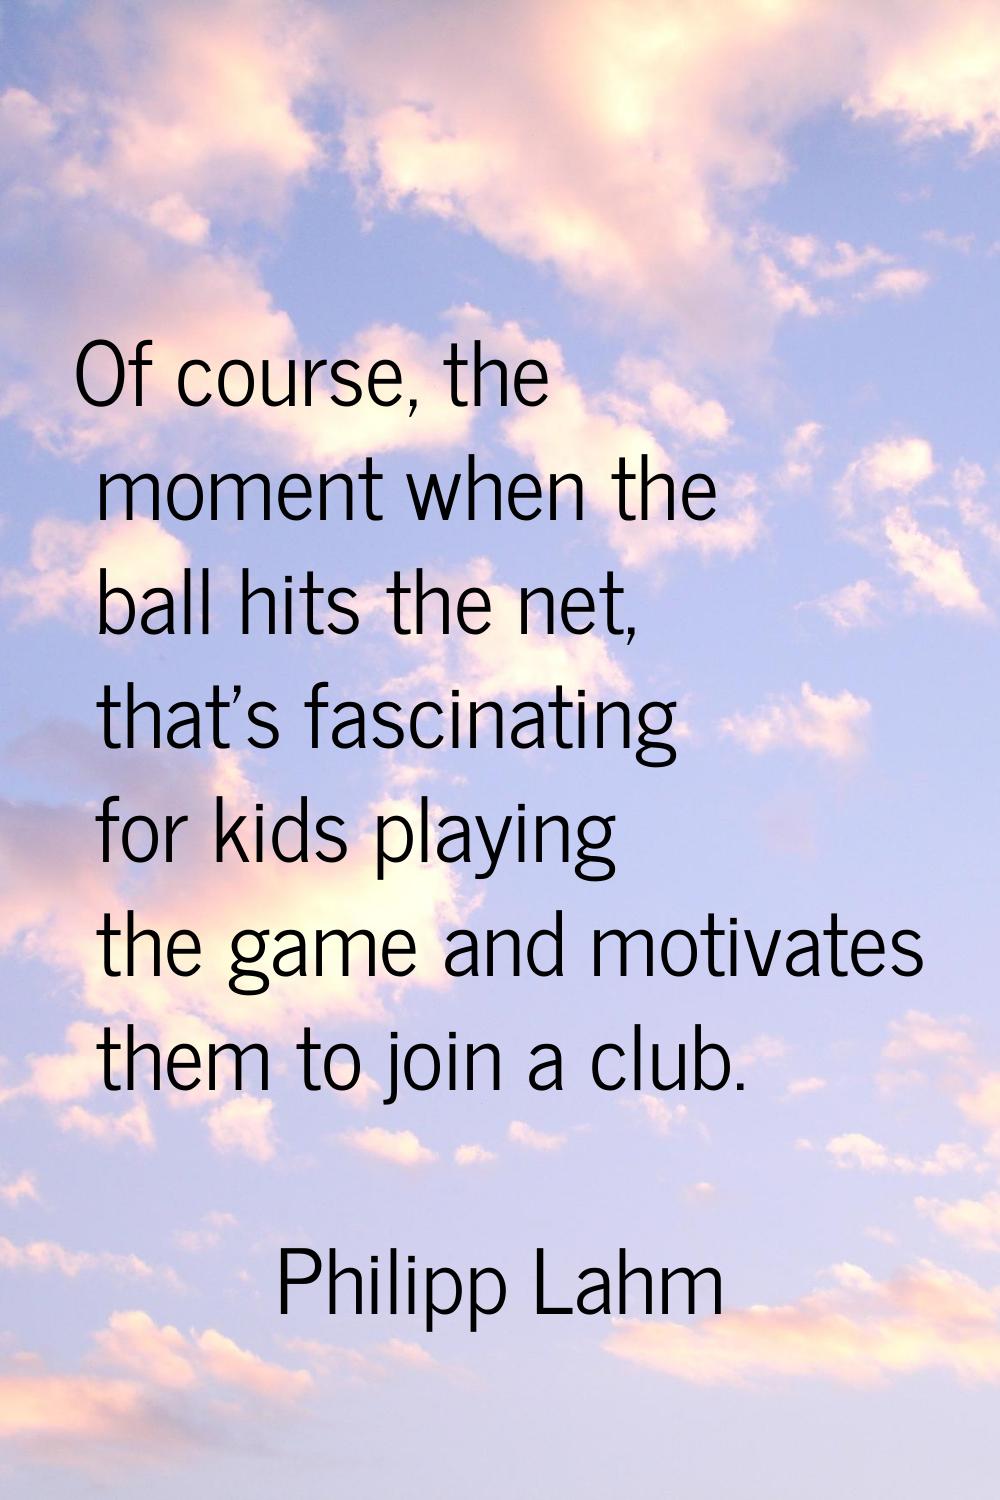 Of course, the moment when the ball hits the net, that's fascinating for kids playing the game and 